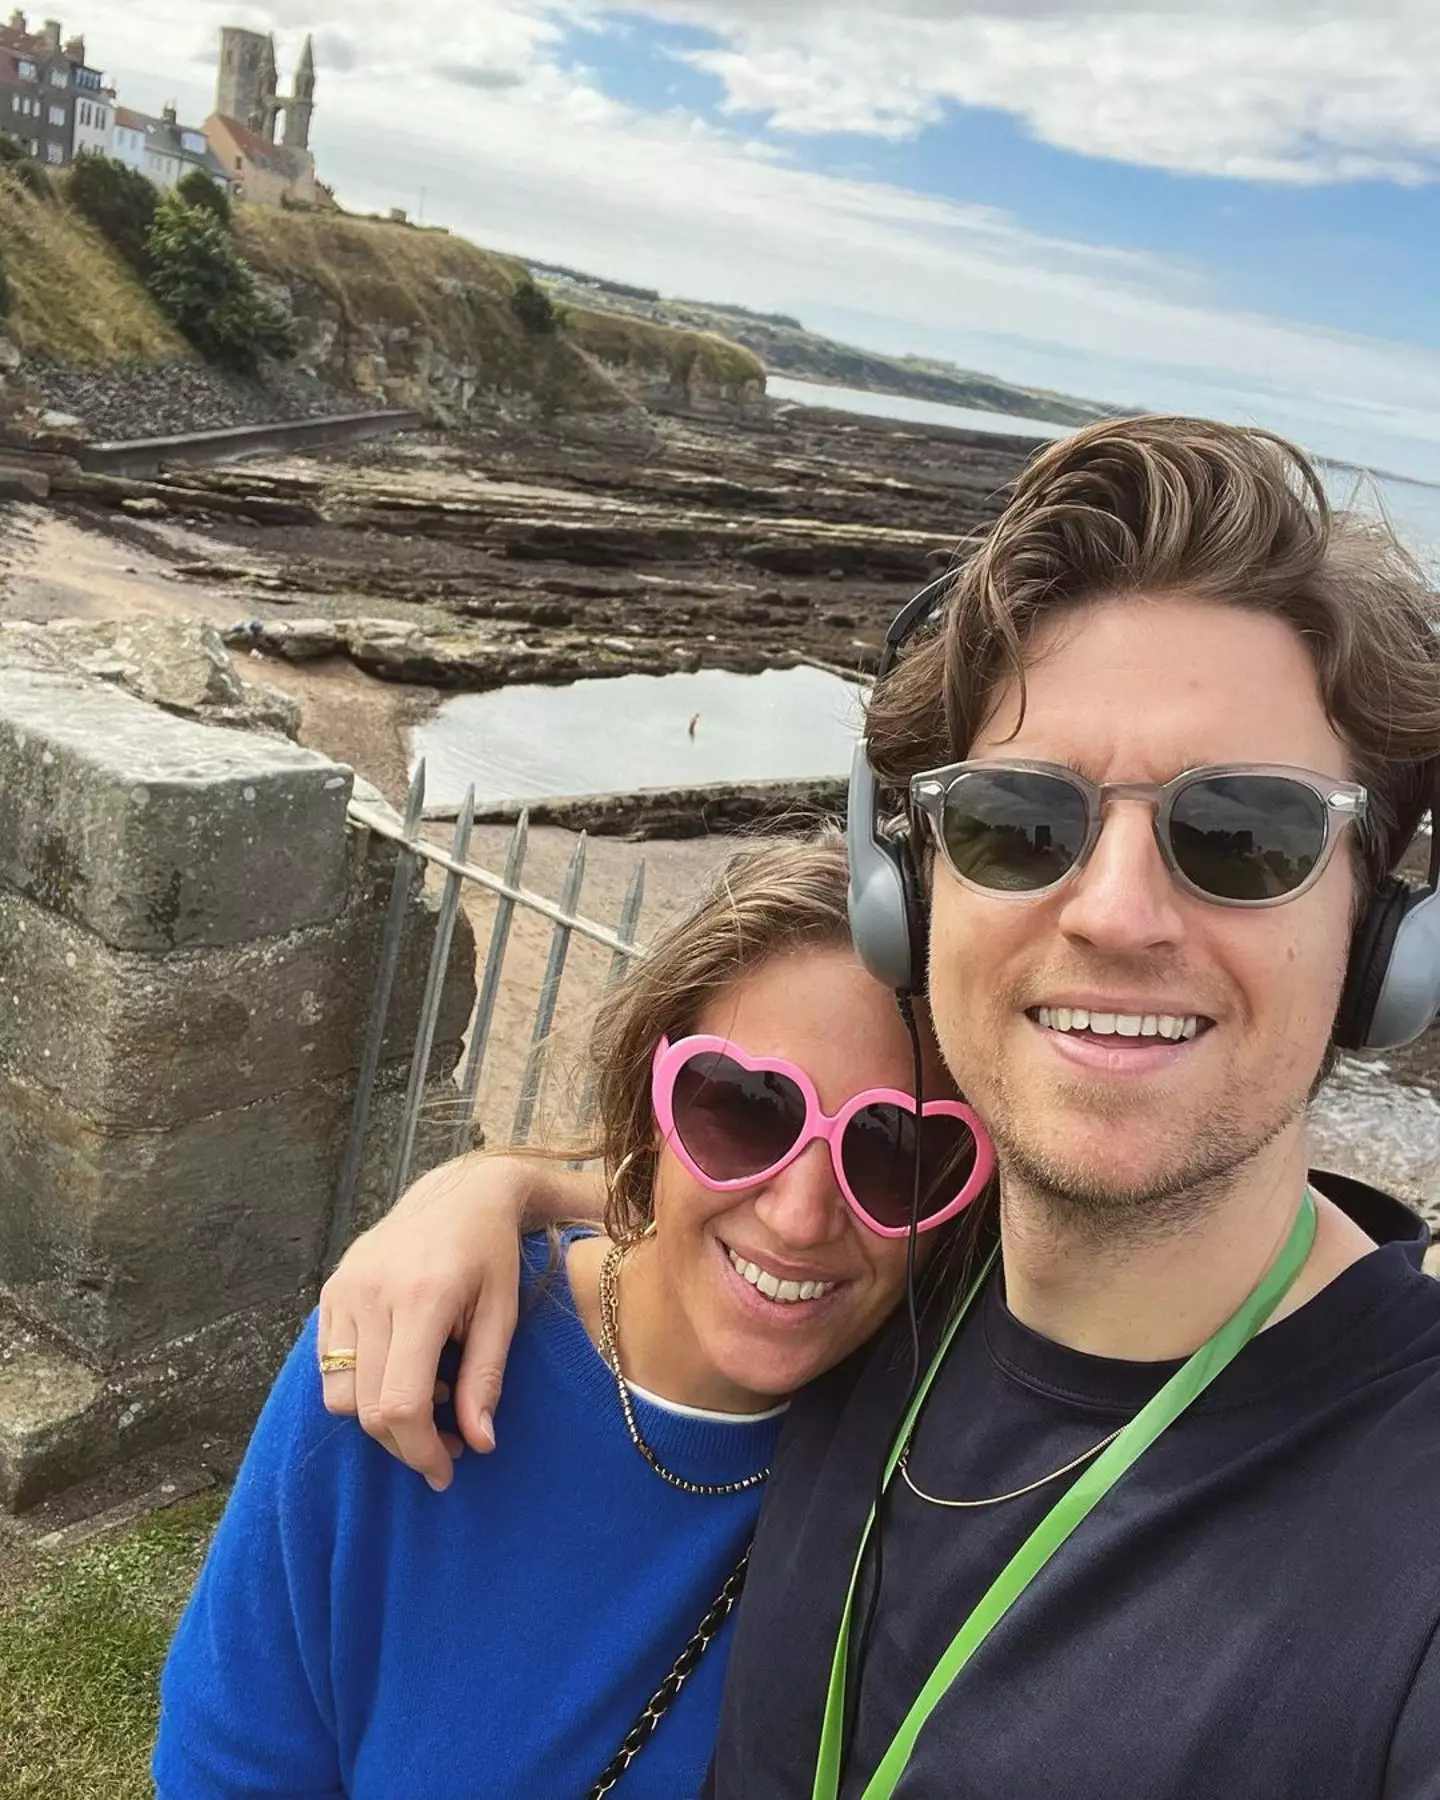 Greg James' wife, author Bella Mackie, has been rushed to hospital.